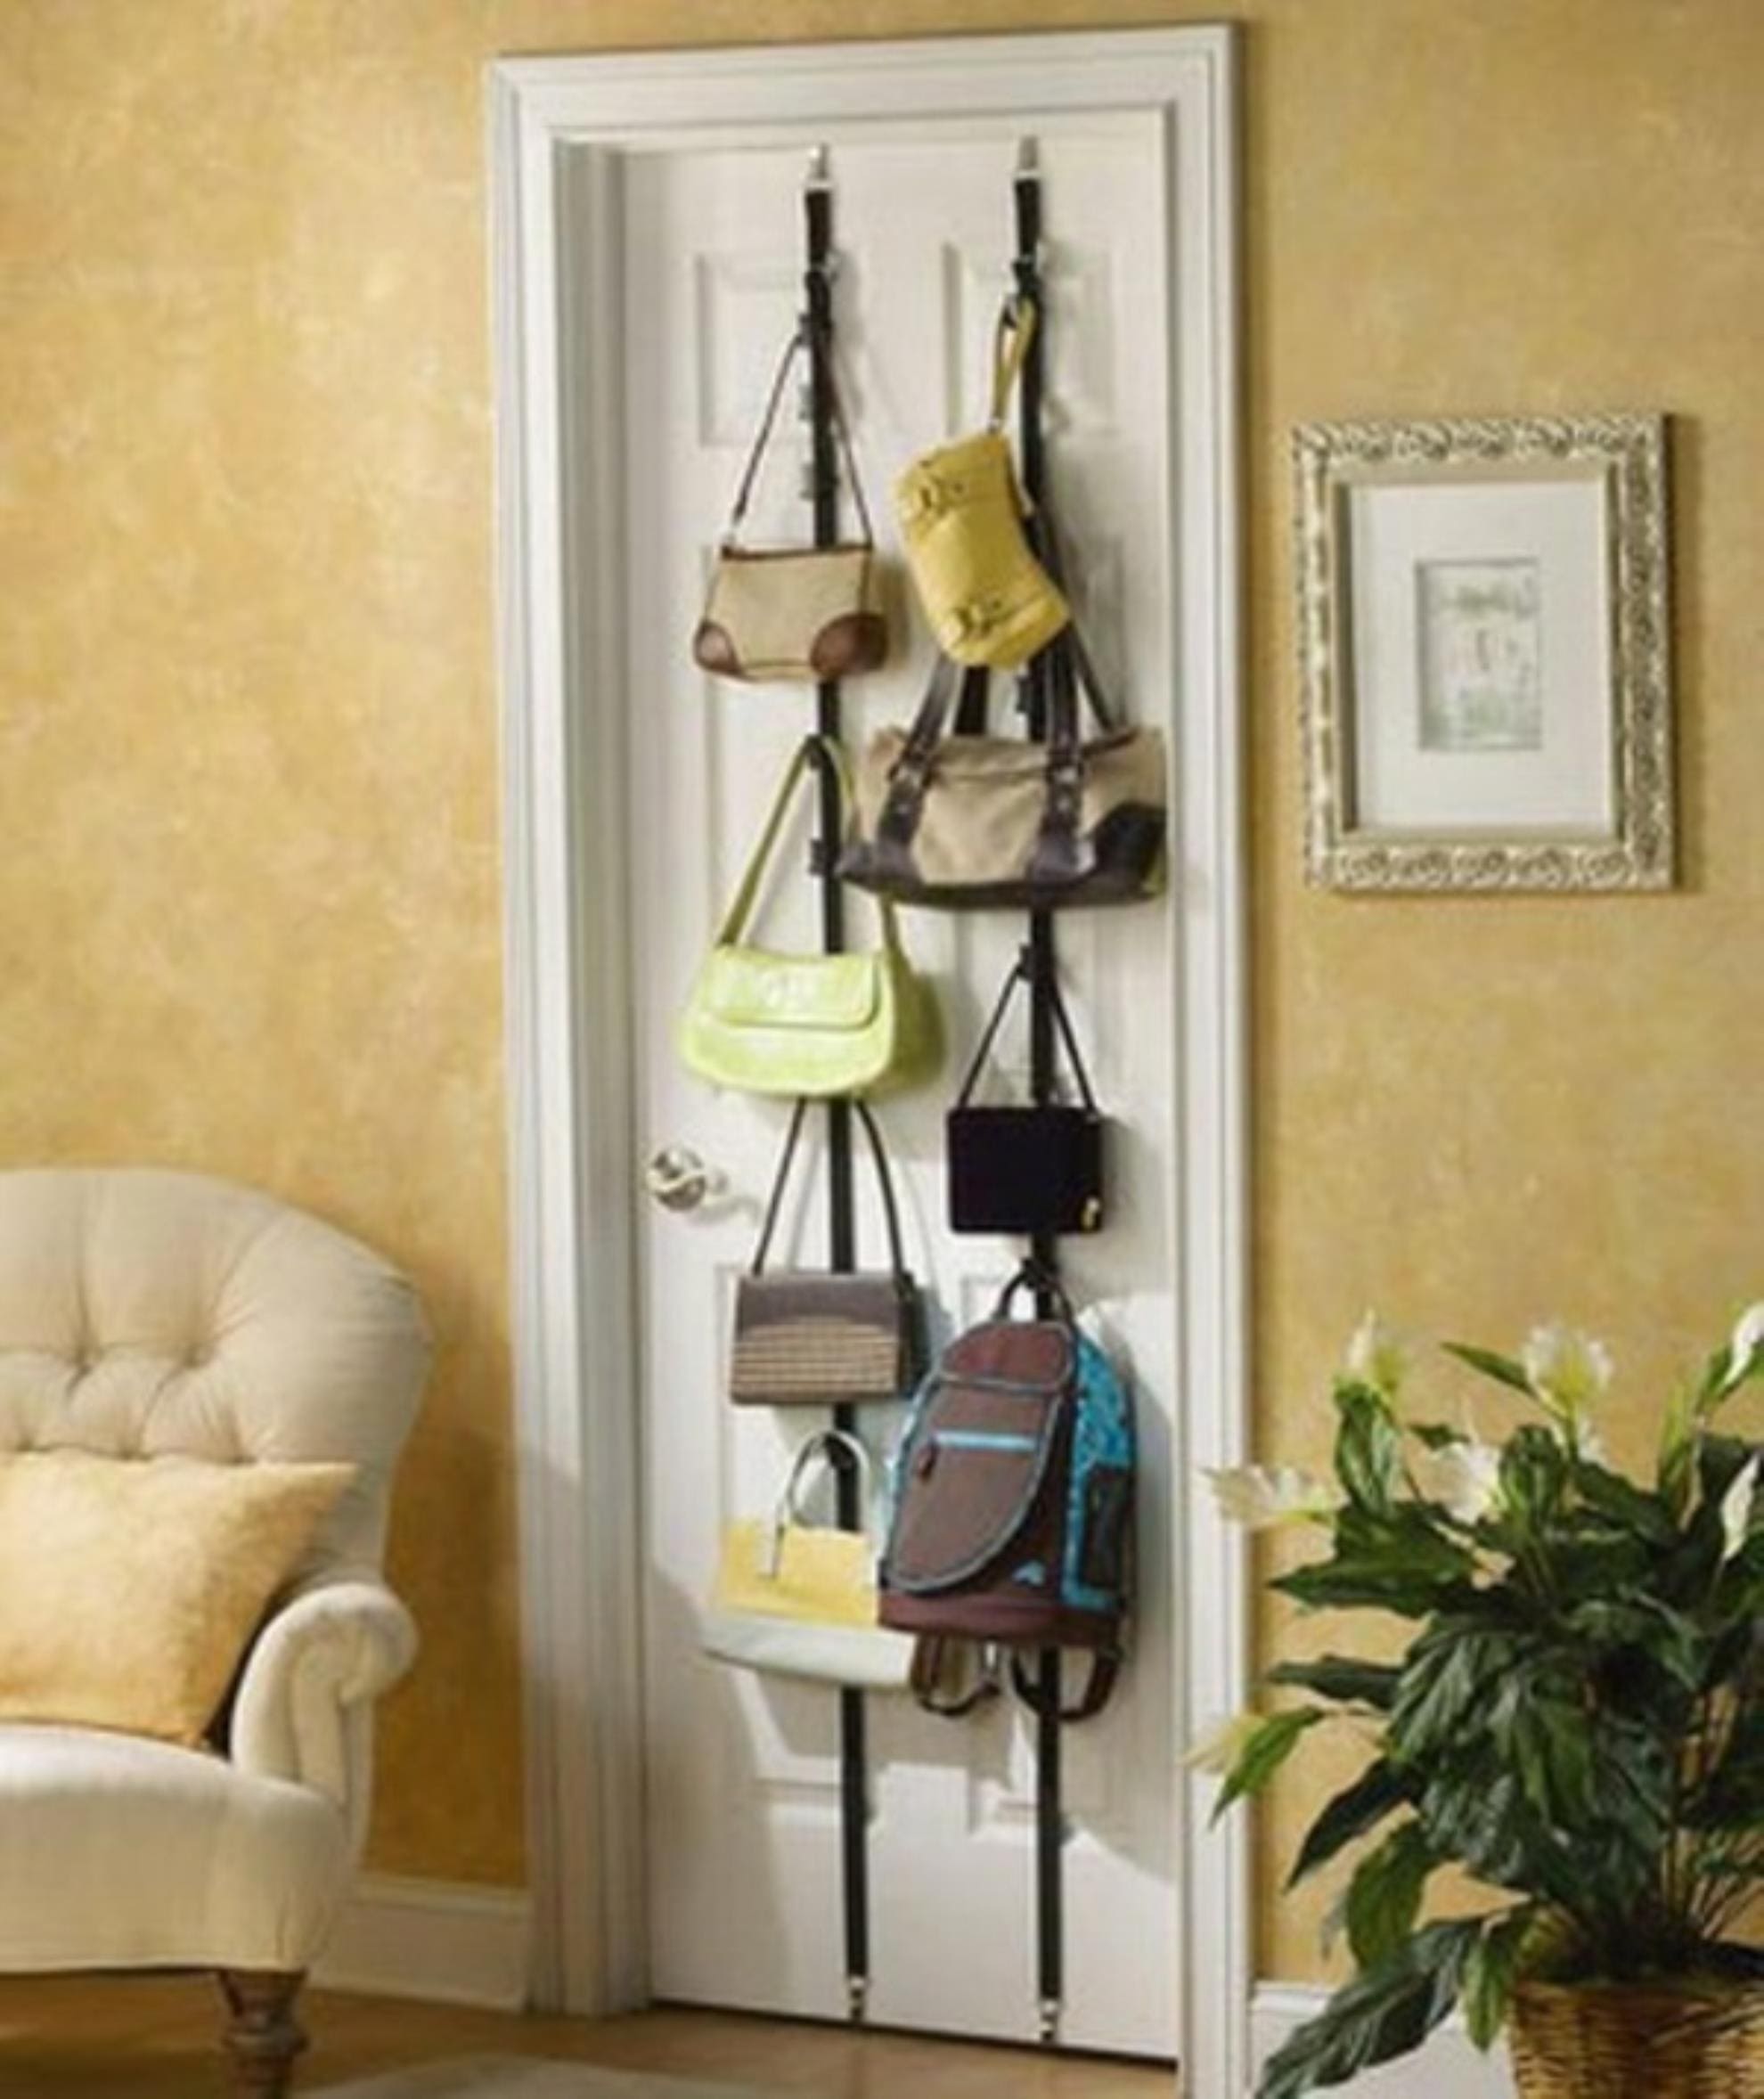 20 bag storage ideas to save your living space - 75